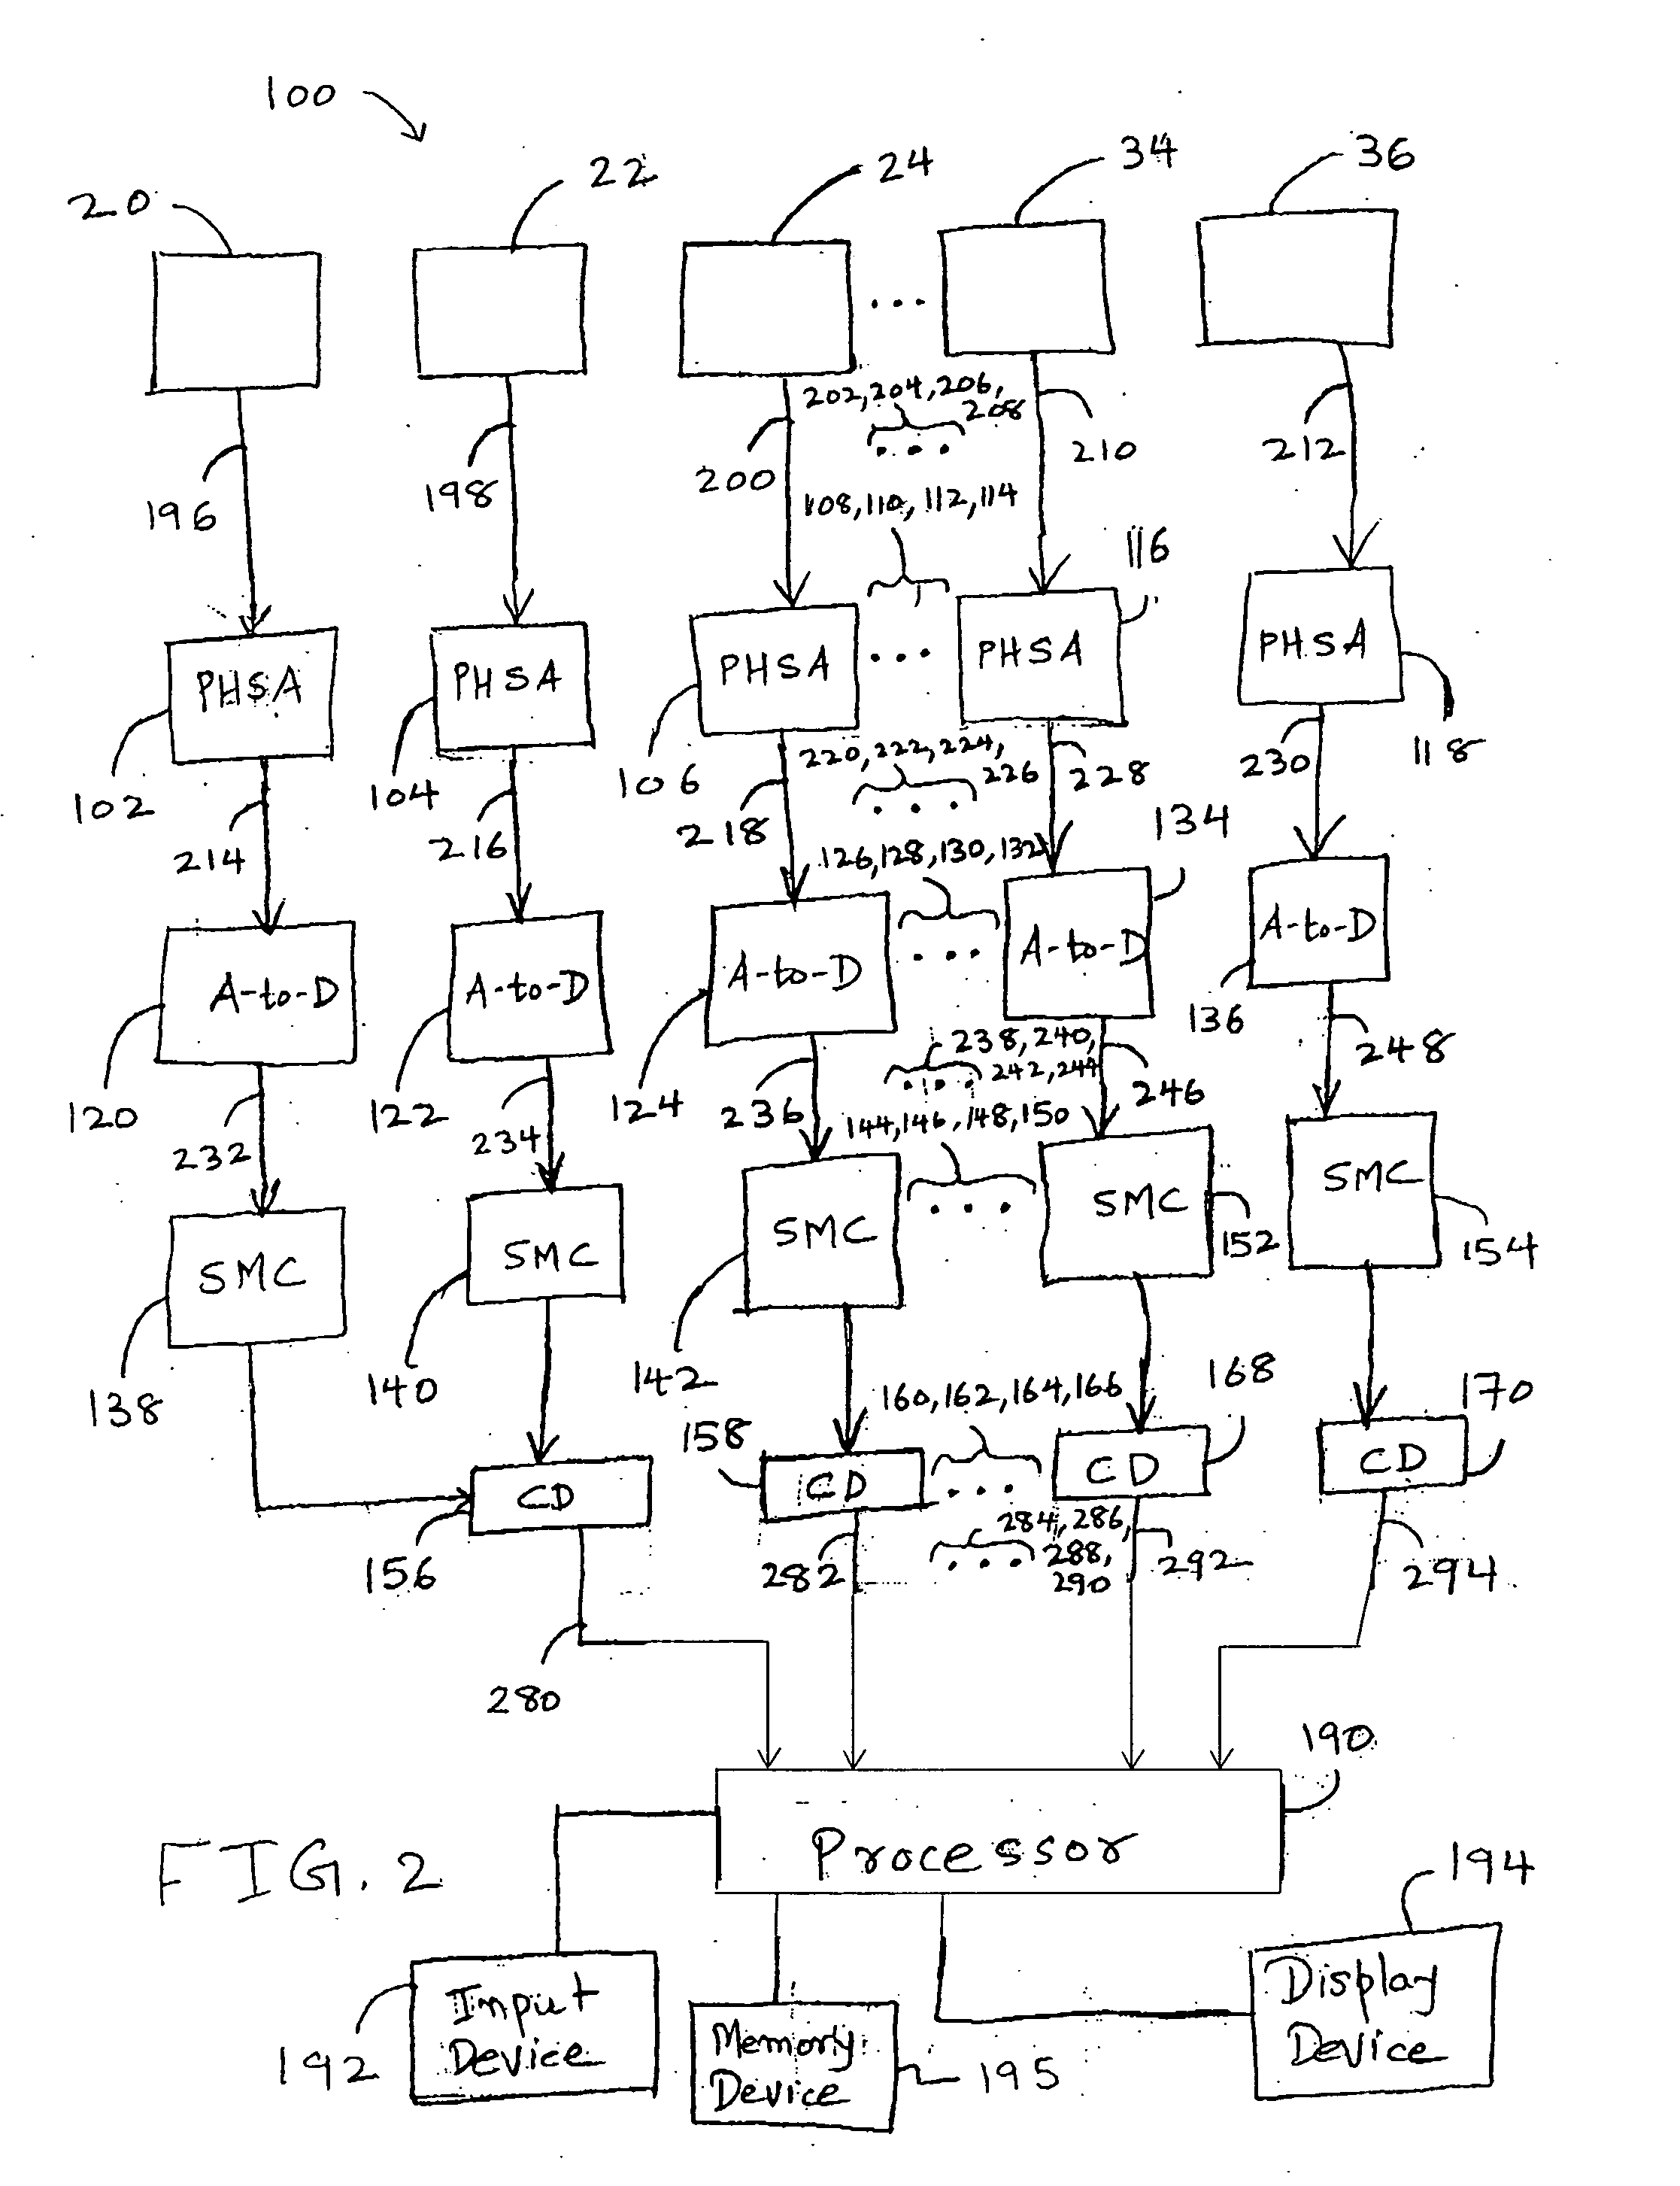 Systems and methods for determining an atomic number of a substance